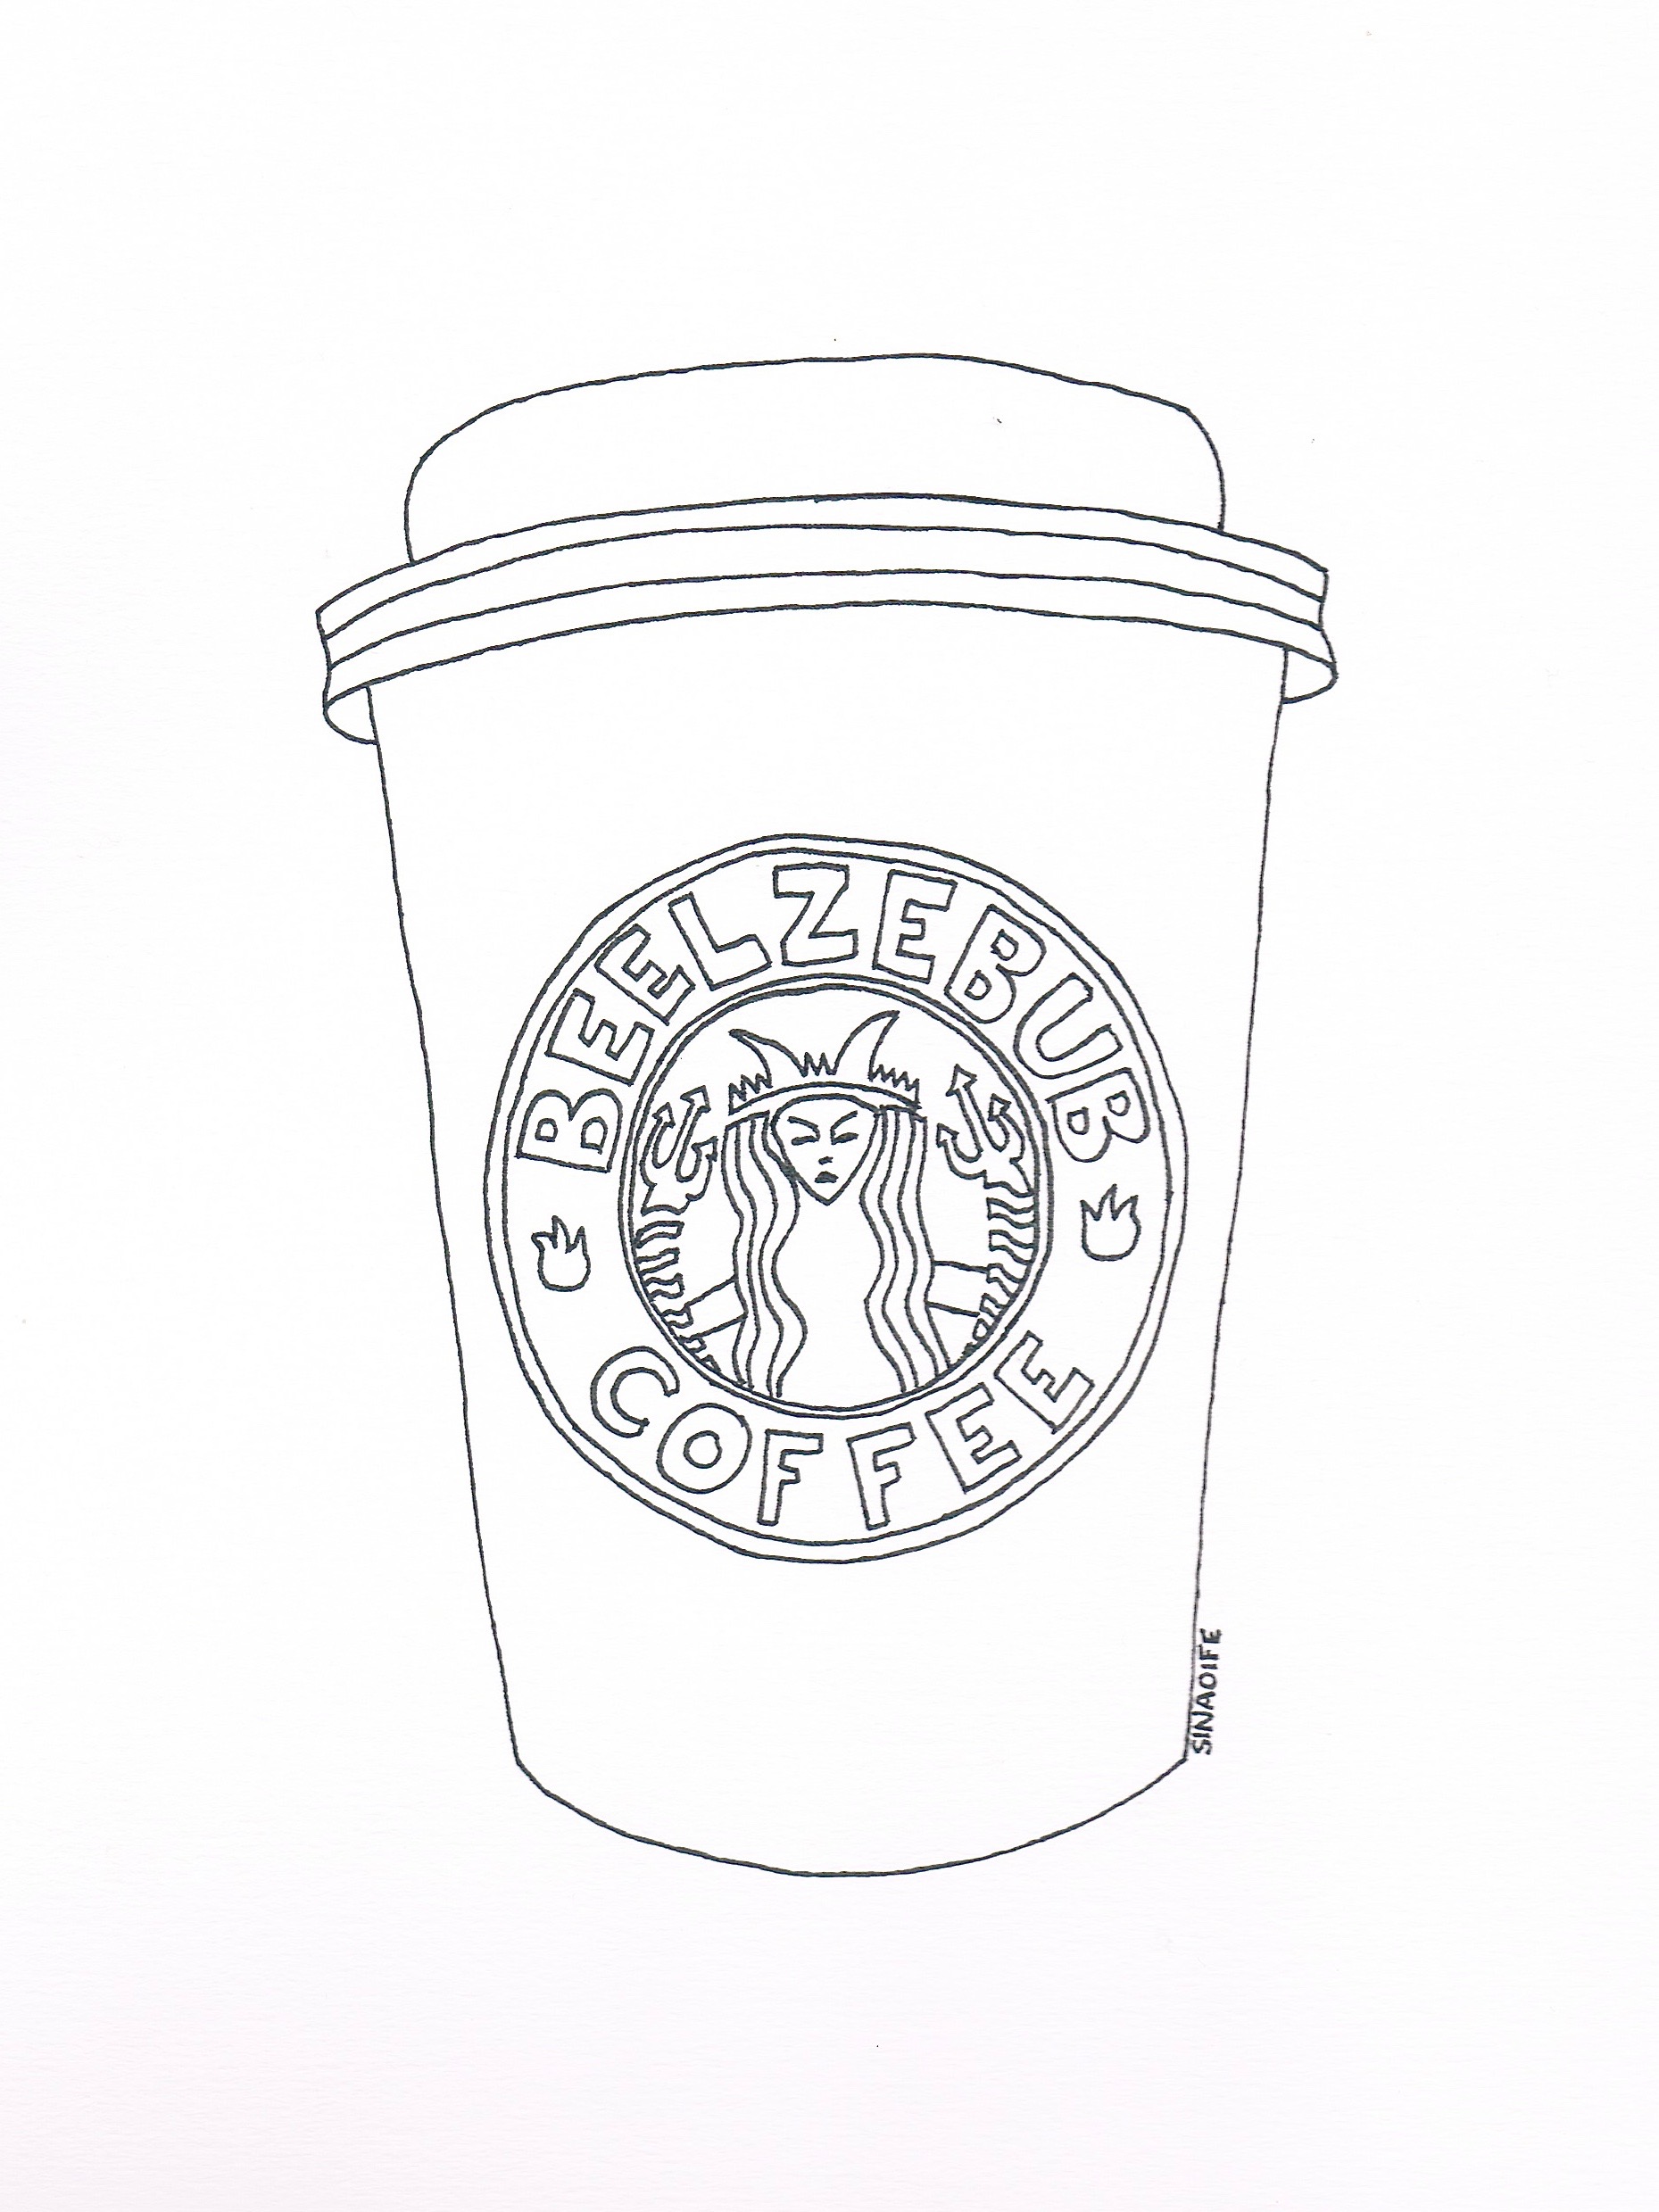 Starbucks Logo Coloring Page Sketch Coloring Page Art Starbucks | The ...